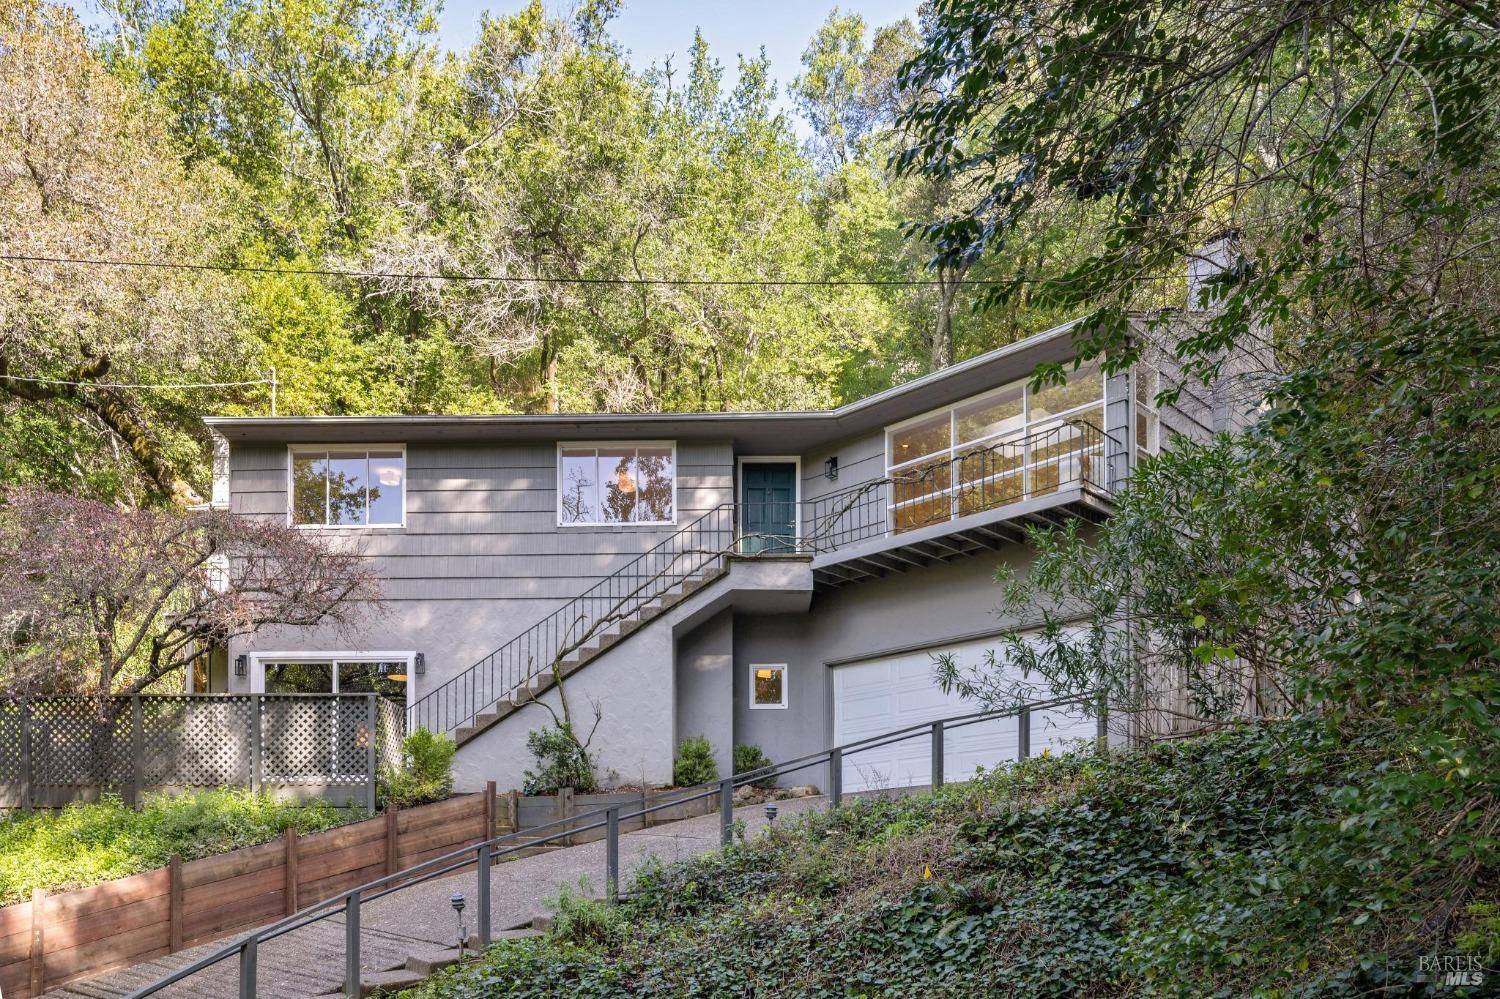 Located in the highly sought-after Winship Park neighborhood of Ross, this mid-century home at 95 Wellington Avenue offers a perfect blend of style and comfort. The residence spans across two levels and features 4 bedrooms,2.5 bathrooms, and a total living area of approx. 2,300 sq ft on a lot of over 13,000 sq ft, providing a spacious and timeless living experience. The living room is spacious and offers stunning views of the valley, a wood-burning fireplace, refinished hardwood floors, and skylight that creates a warm and welcoming atmosphere. The adjacent dining room has open shelving, cabinetry, and French doors that lead to a large rear entertaining patio, perfect for indoor-outdoor living. The kitchen is a chef's dream, with ample custom cabinetry and storage space, a pantry, a Wolf Range, a dishwasher, a refrigerator, and a center island that offers storage and prep space. The primary bedroom features vaulted ceilings, skylights, and an ensuite primary bathroom. Upstairs, there are two more bedrooms with refinished oak floors and spacious closets. The lower floor bedroom and half bathroom, with its entrance to a private yard, offer flexibility and can be used as a home office or guest room. The home also features a garage with an automatic door and interior access.